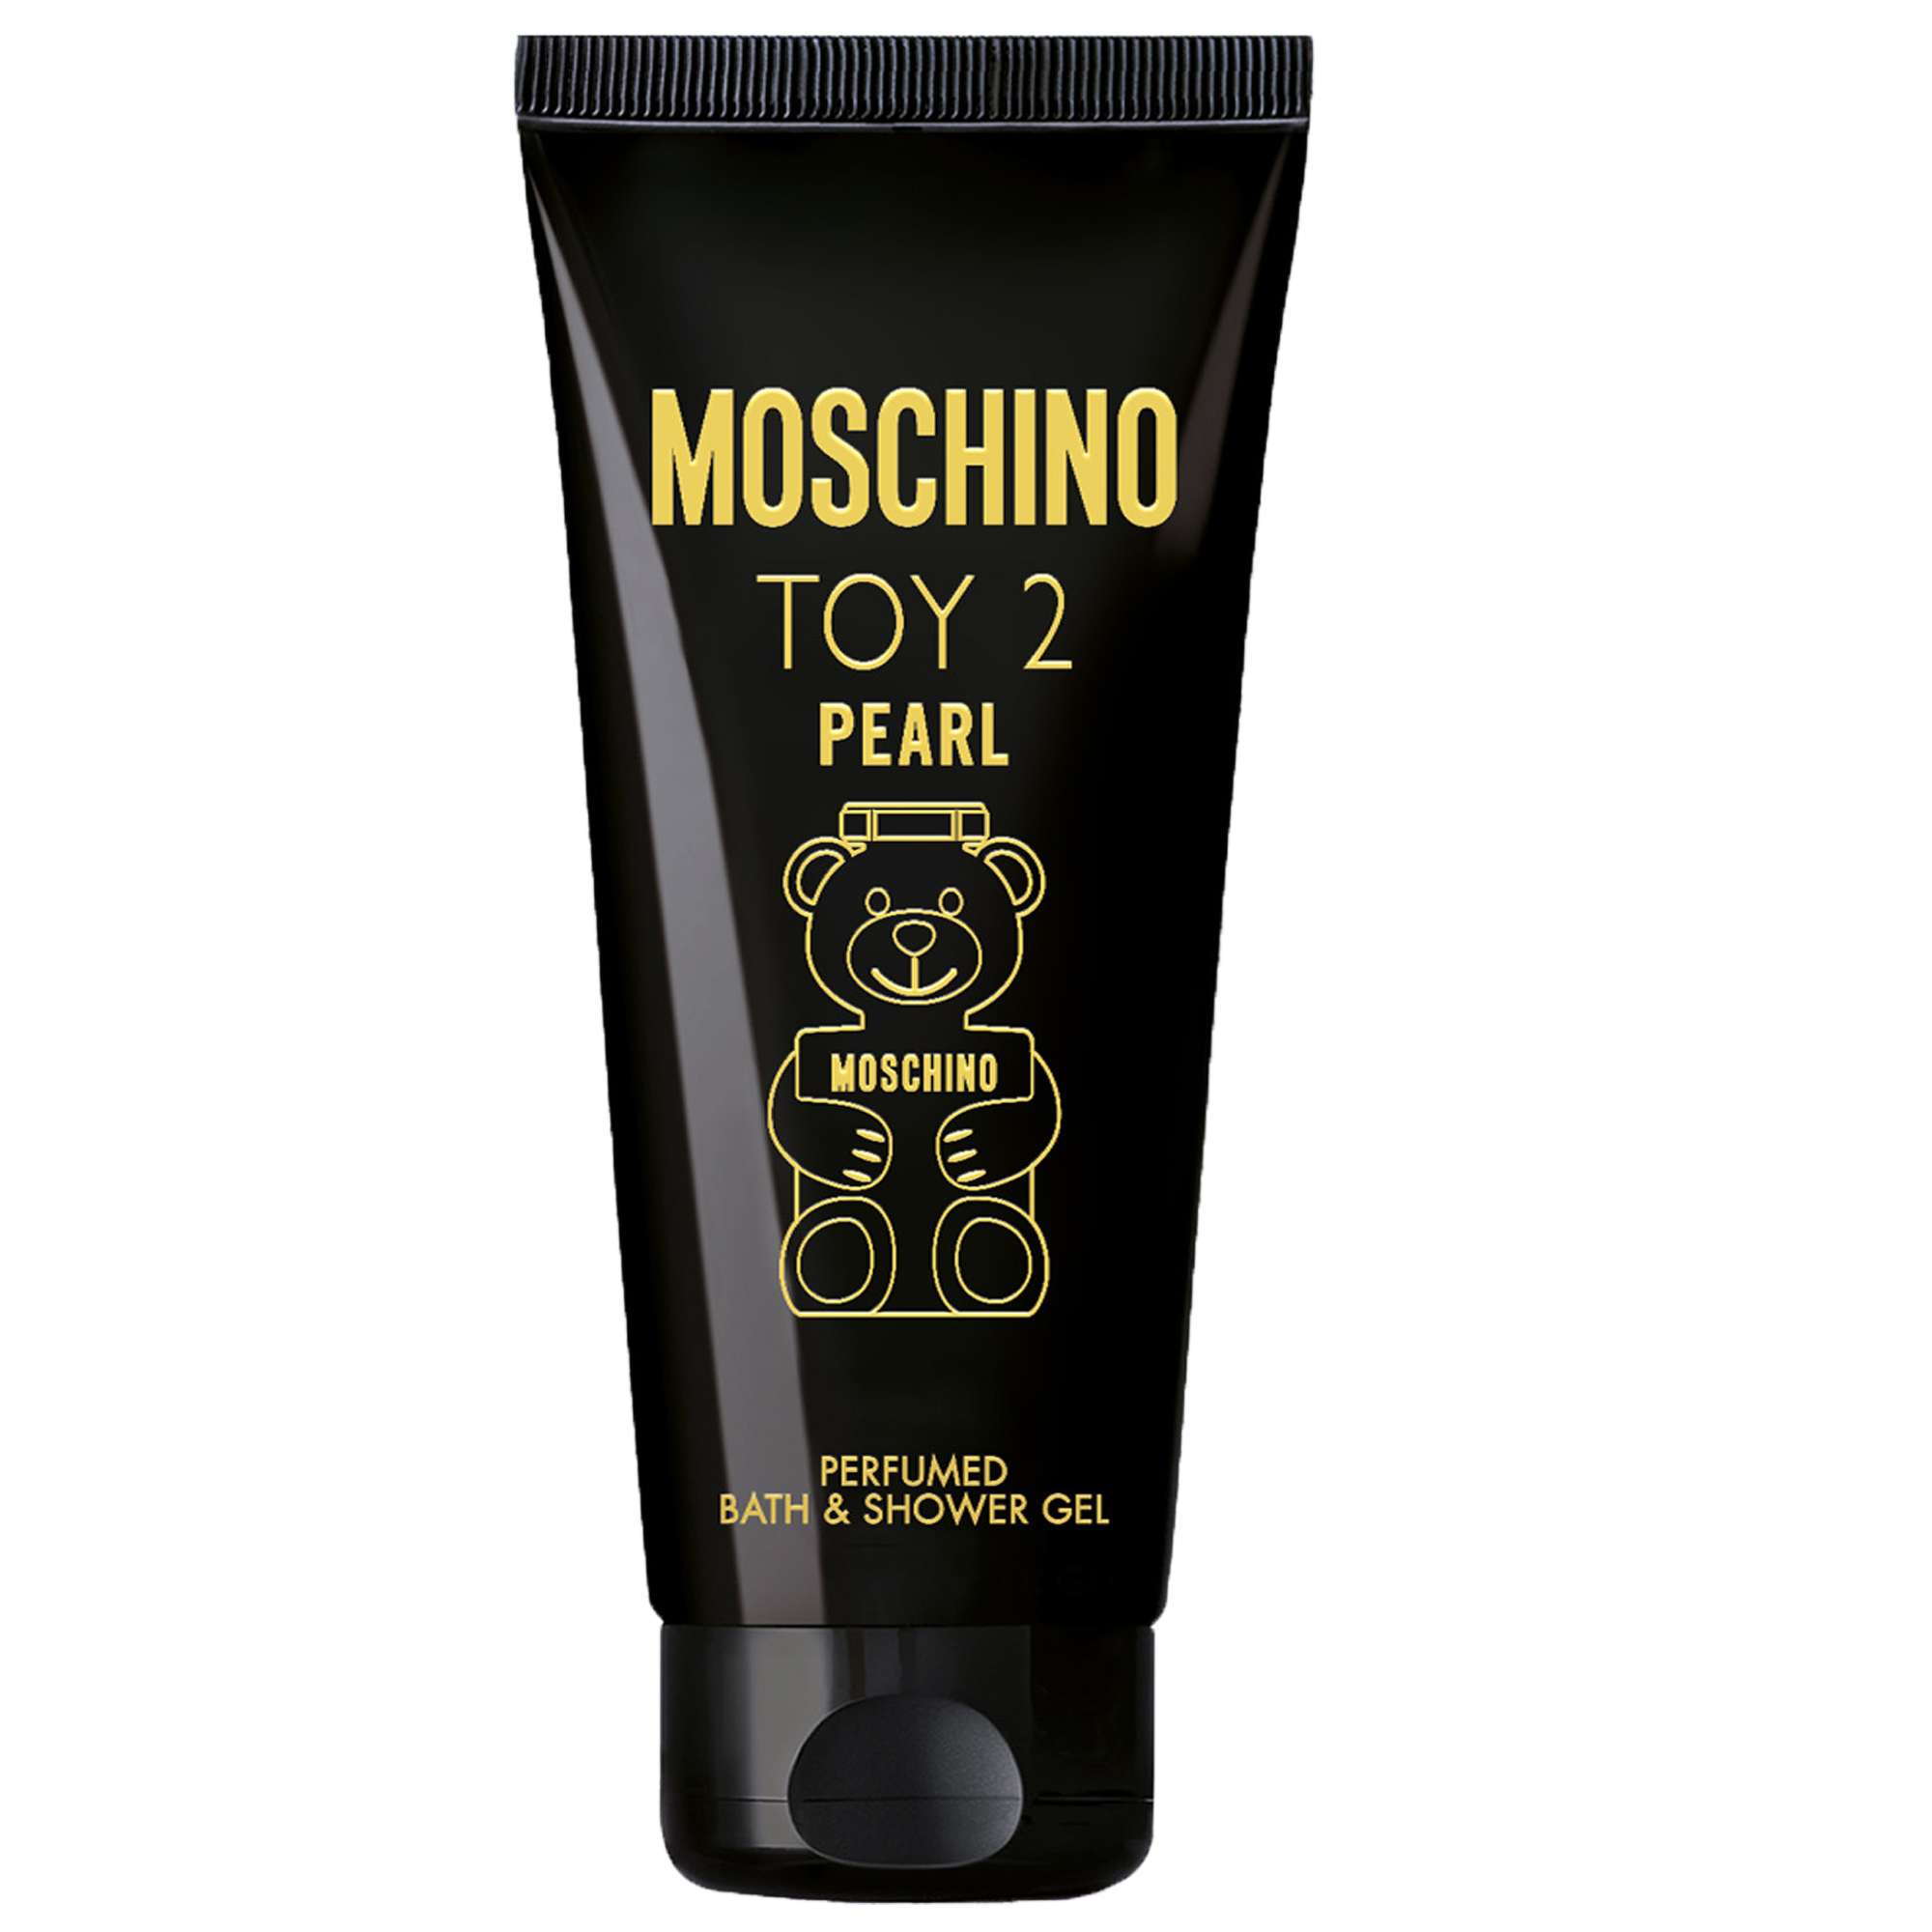 Image of Moschino Toy 2 Pearl Shower Gel 200ml